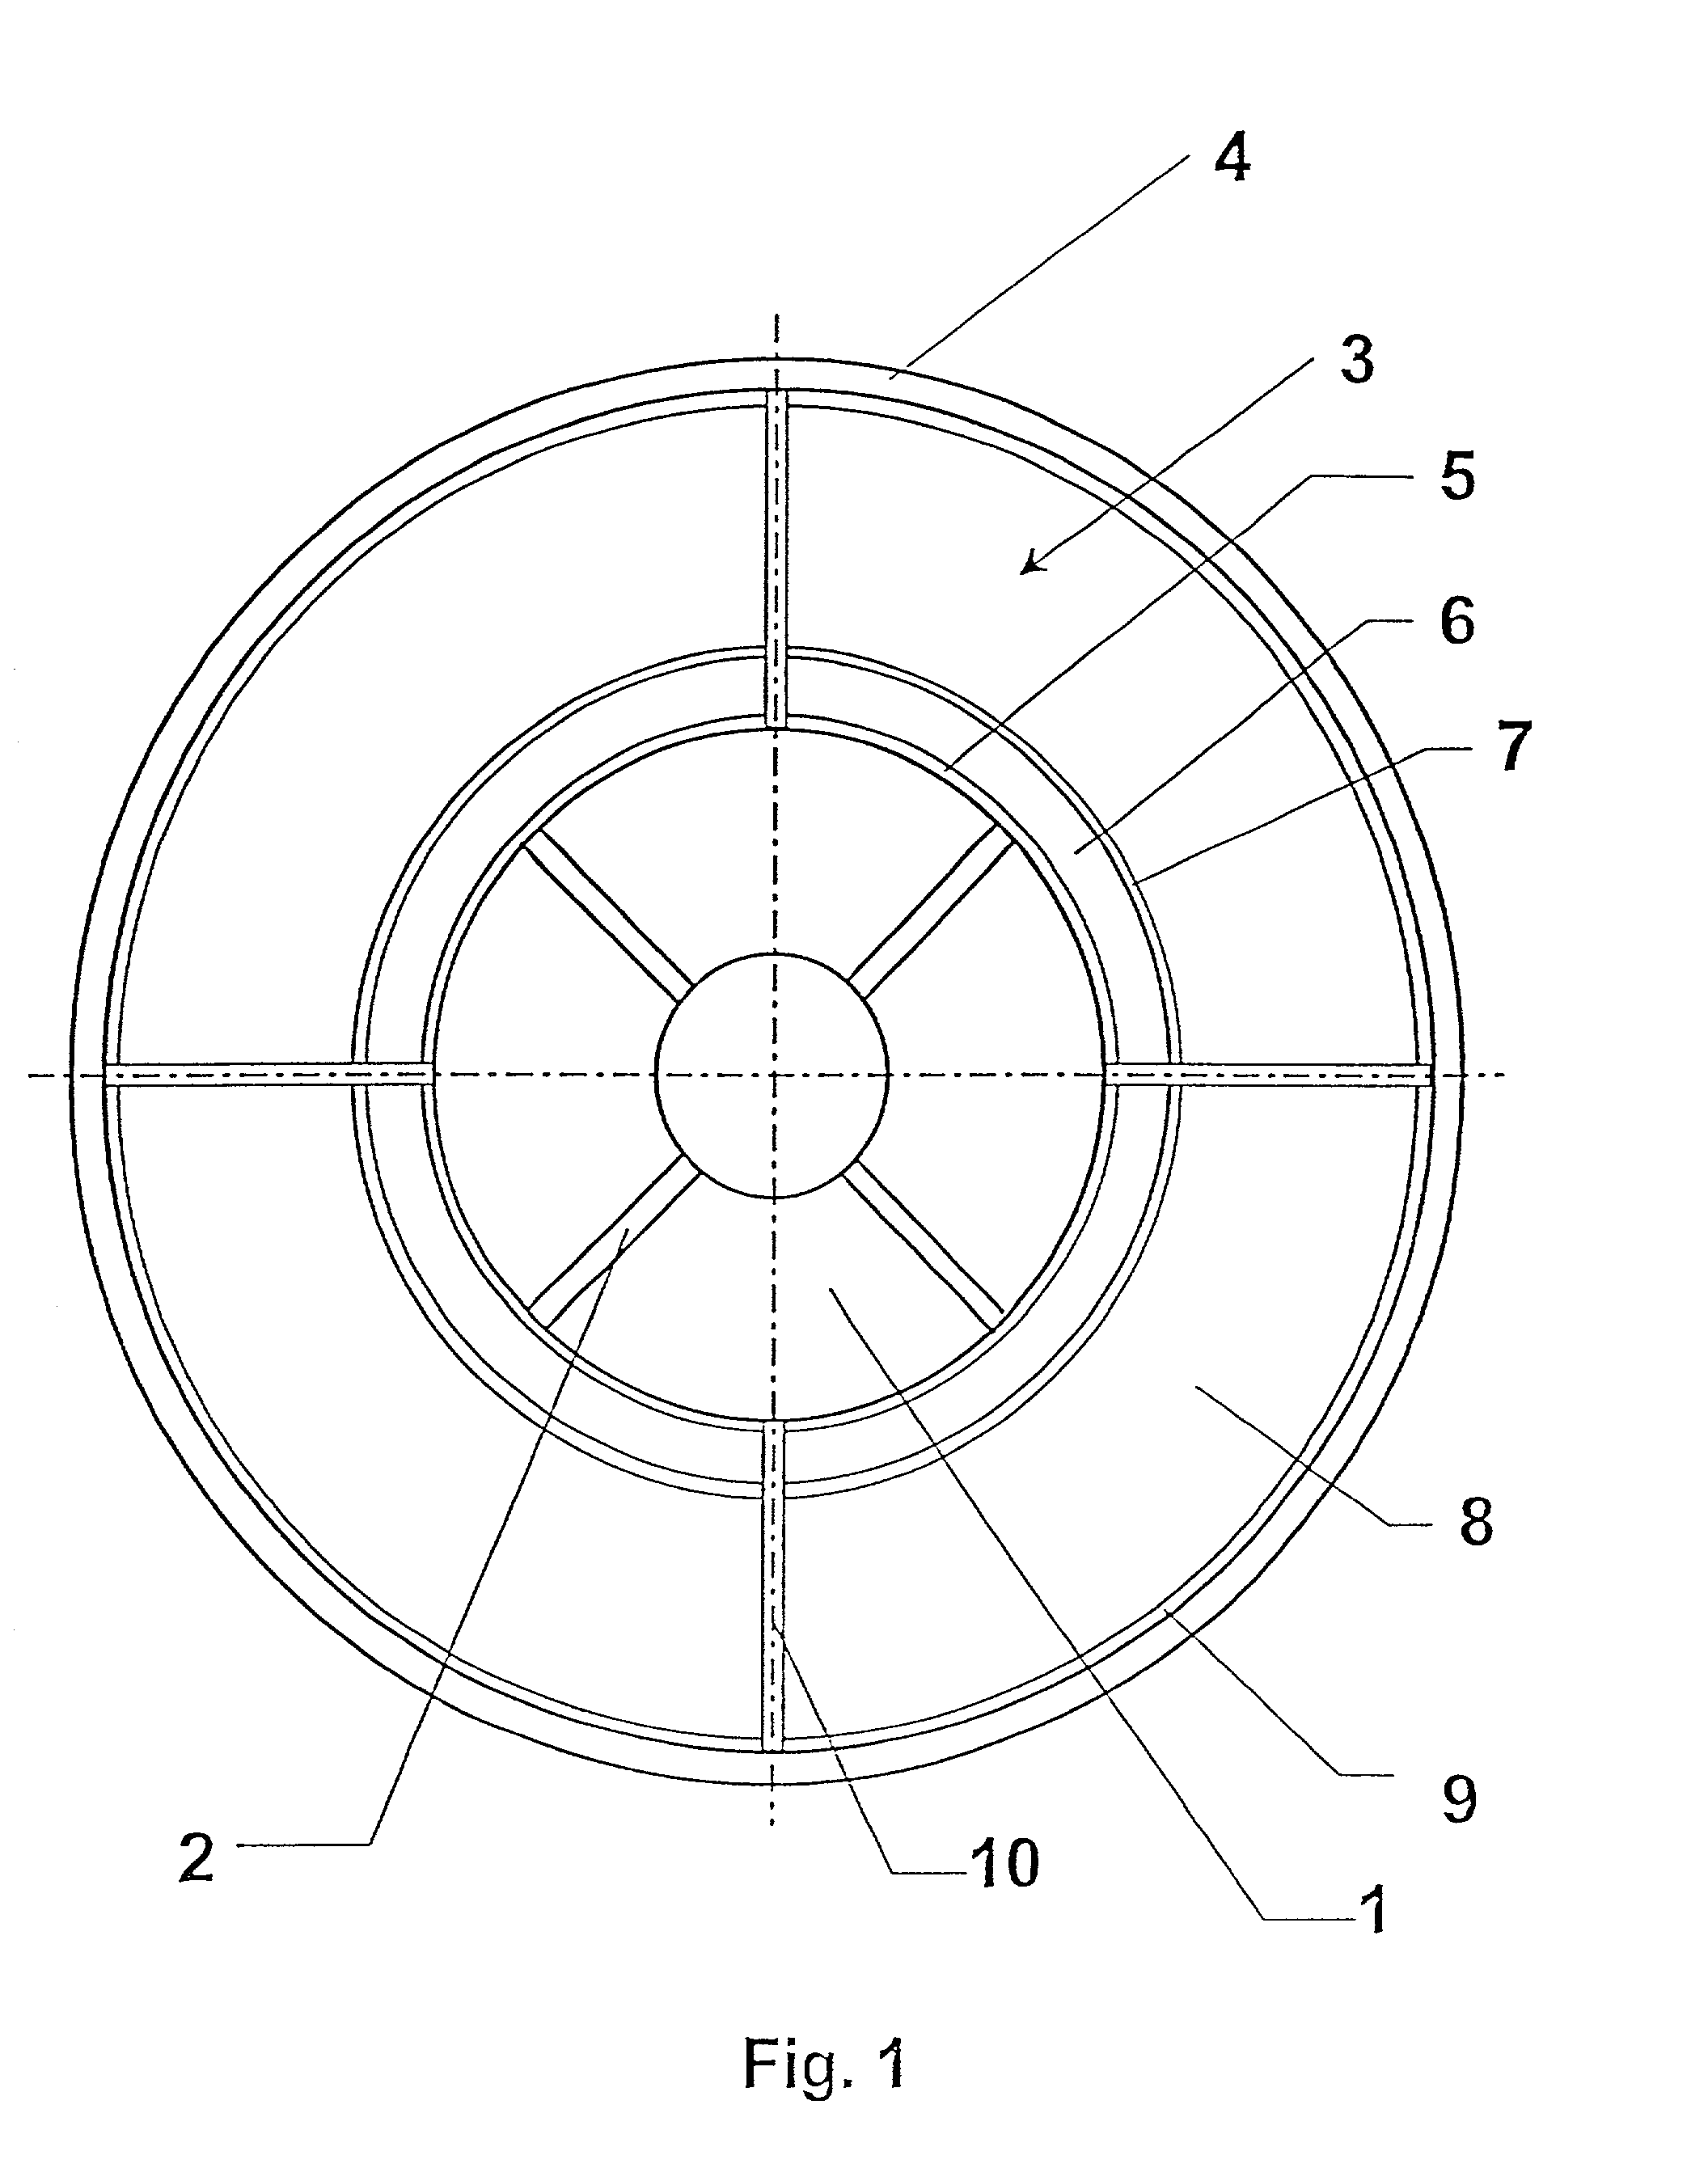 Variable-format web-fed offset printing machine and method of producing variable-format surfaces